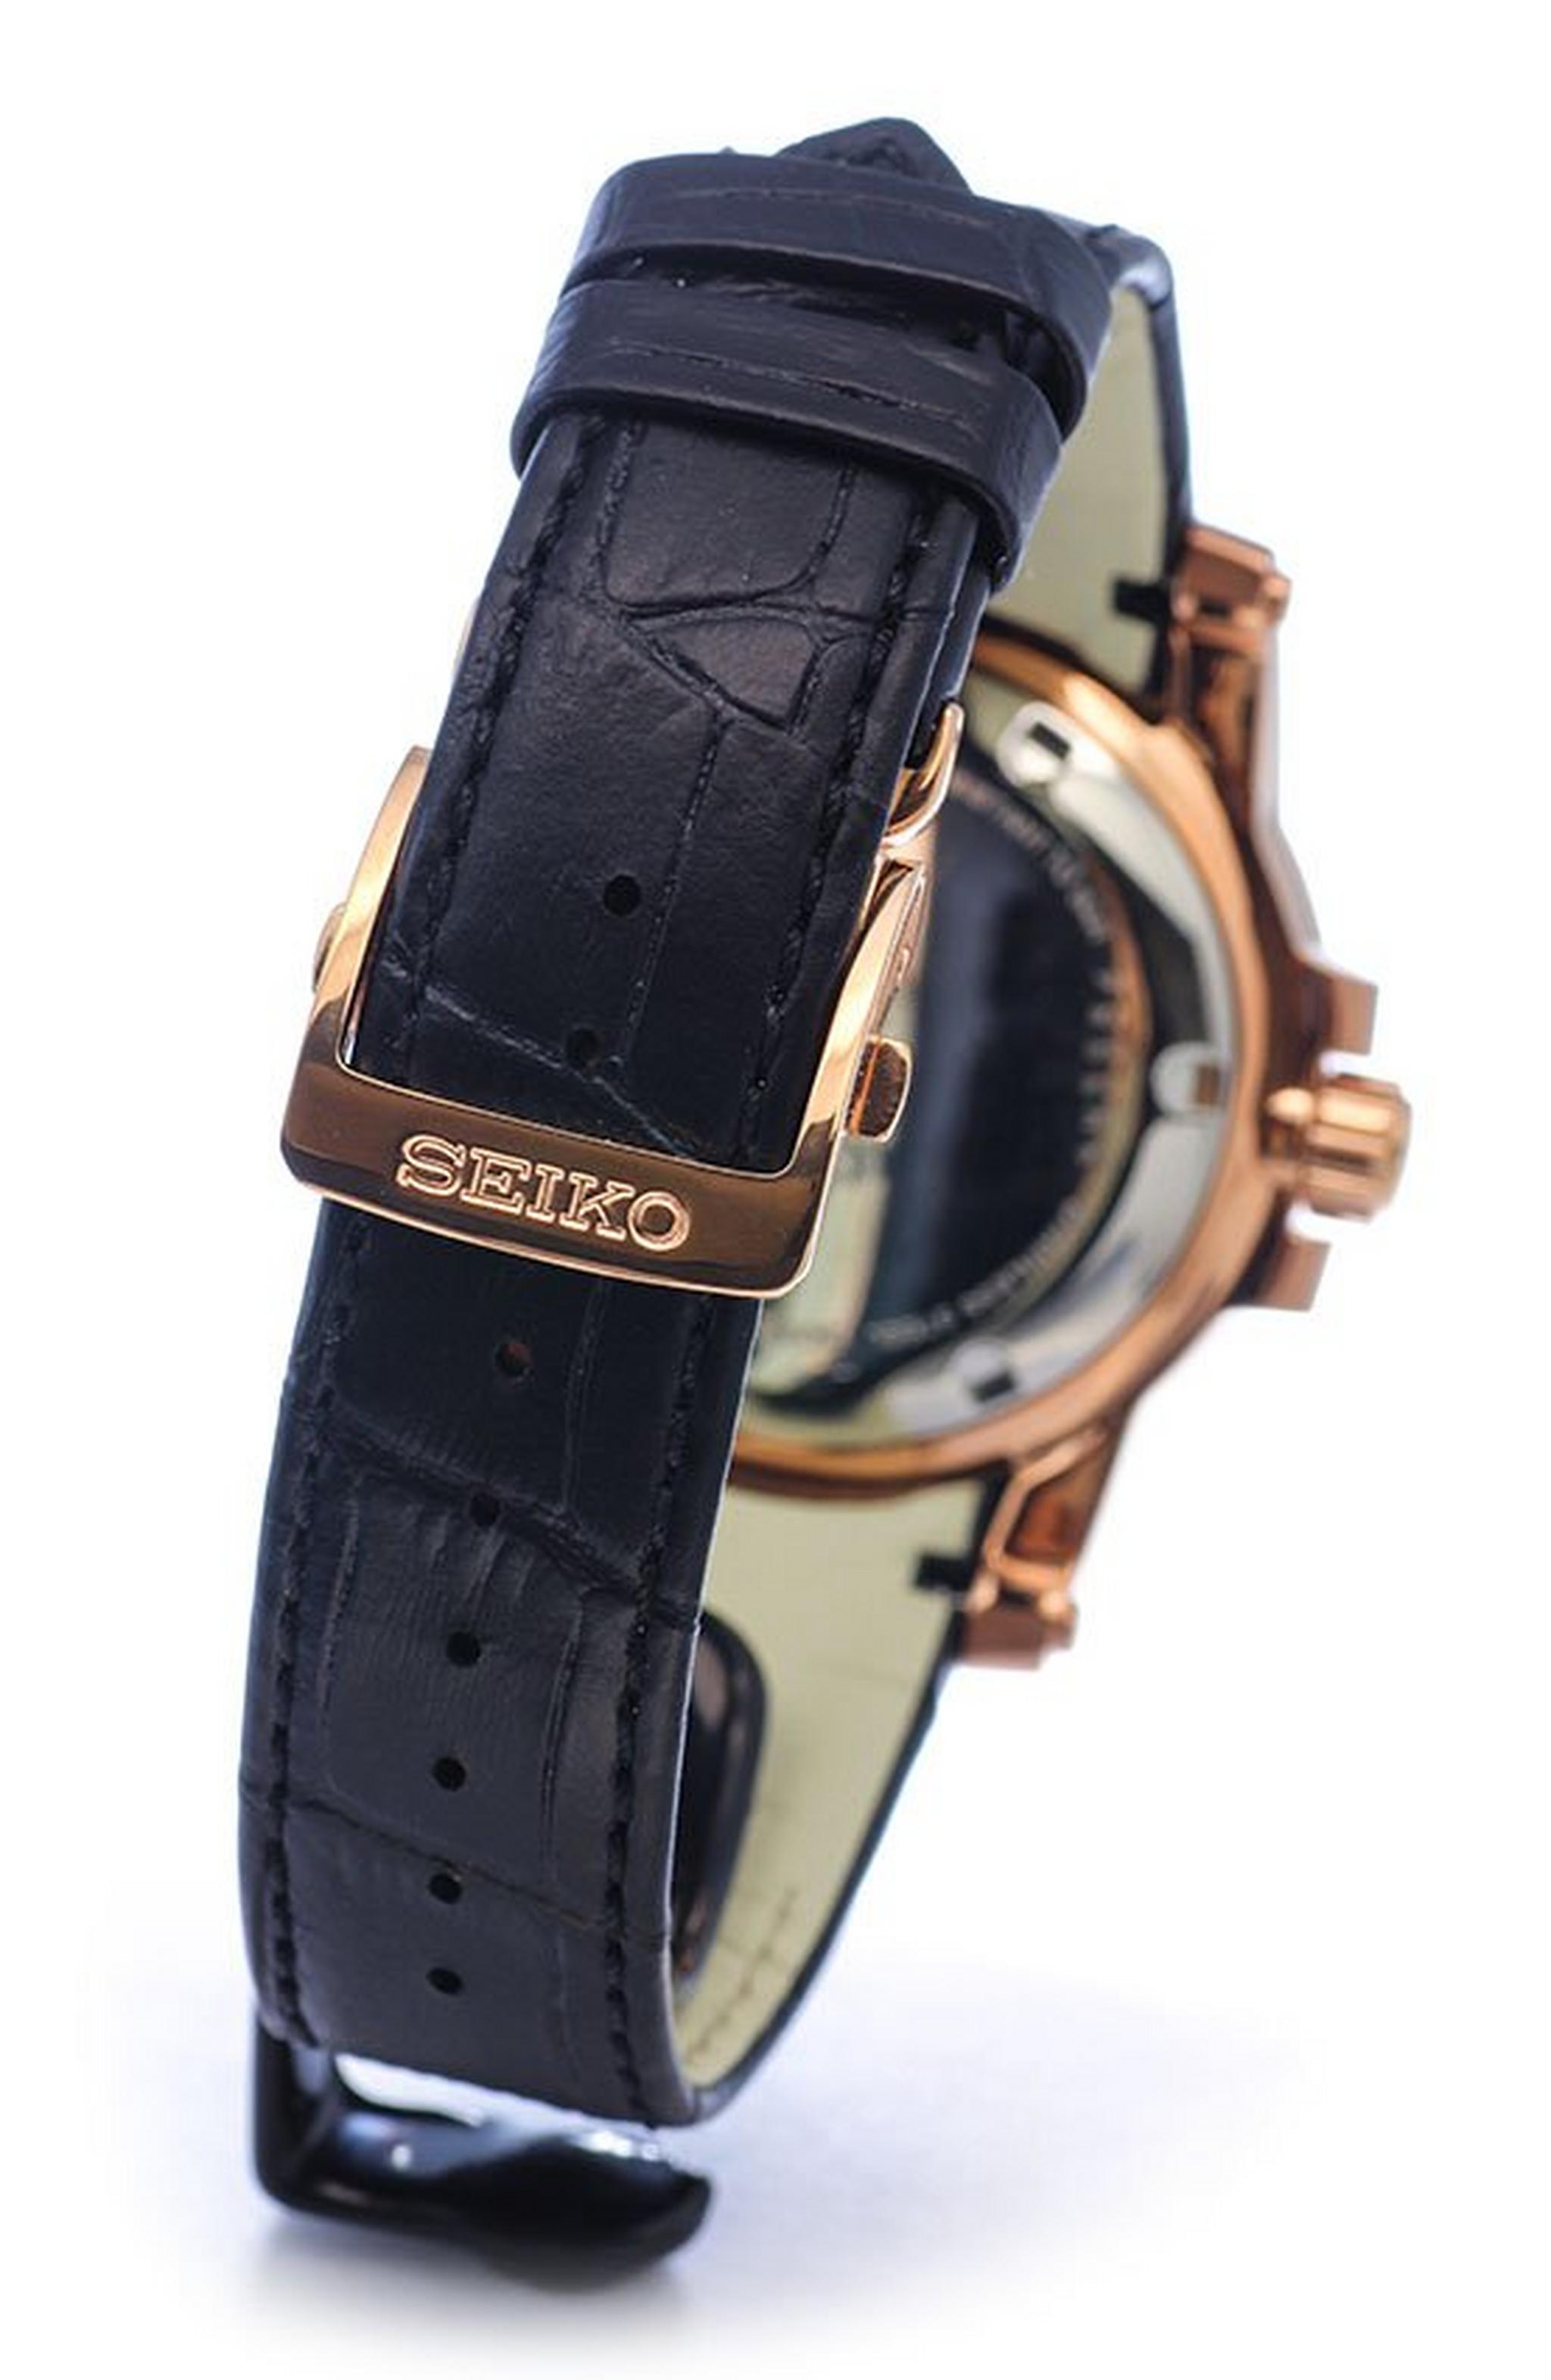 Seiko RG016 Gents Watch - Leather Strap